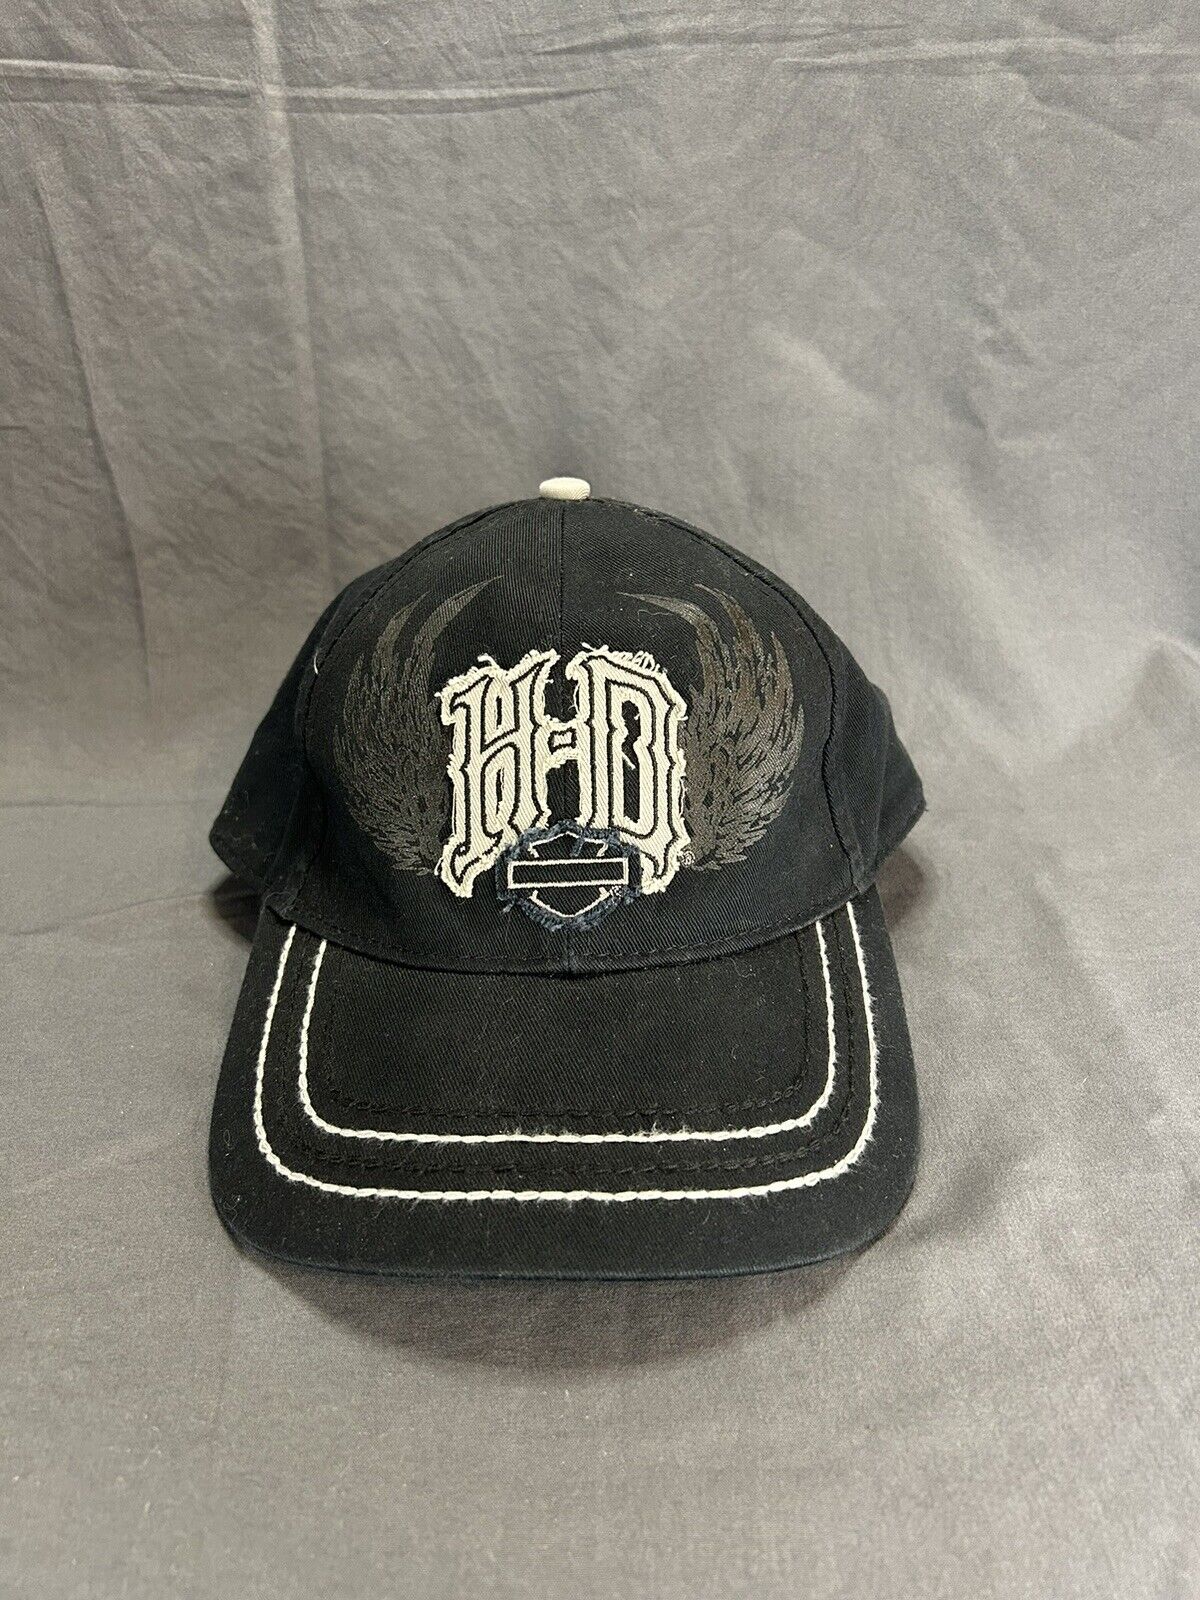 Harley Davidson hat cap black Gift Birthday Fathers Day Discount Sale Collect